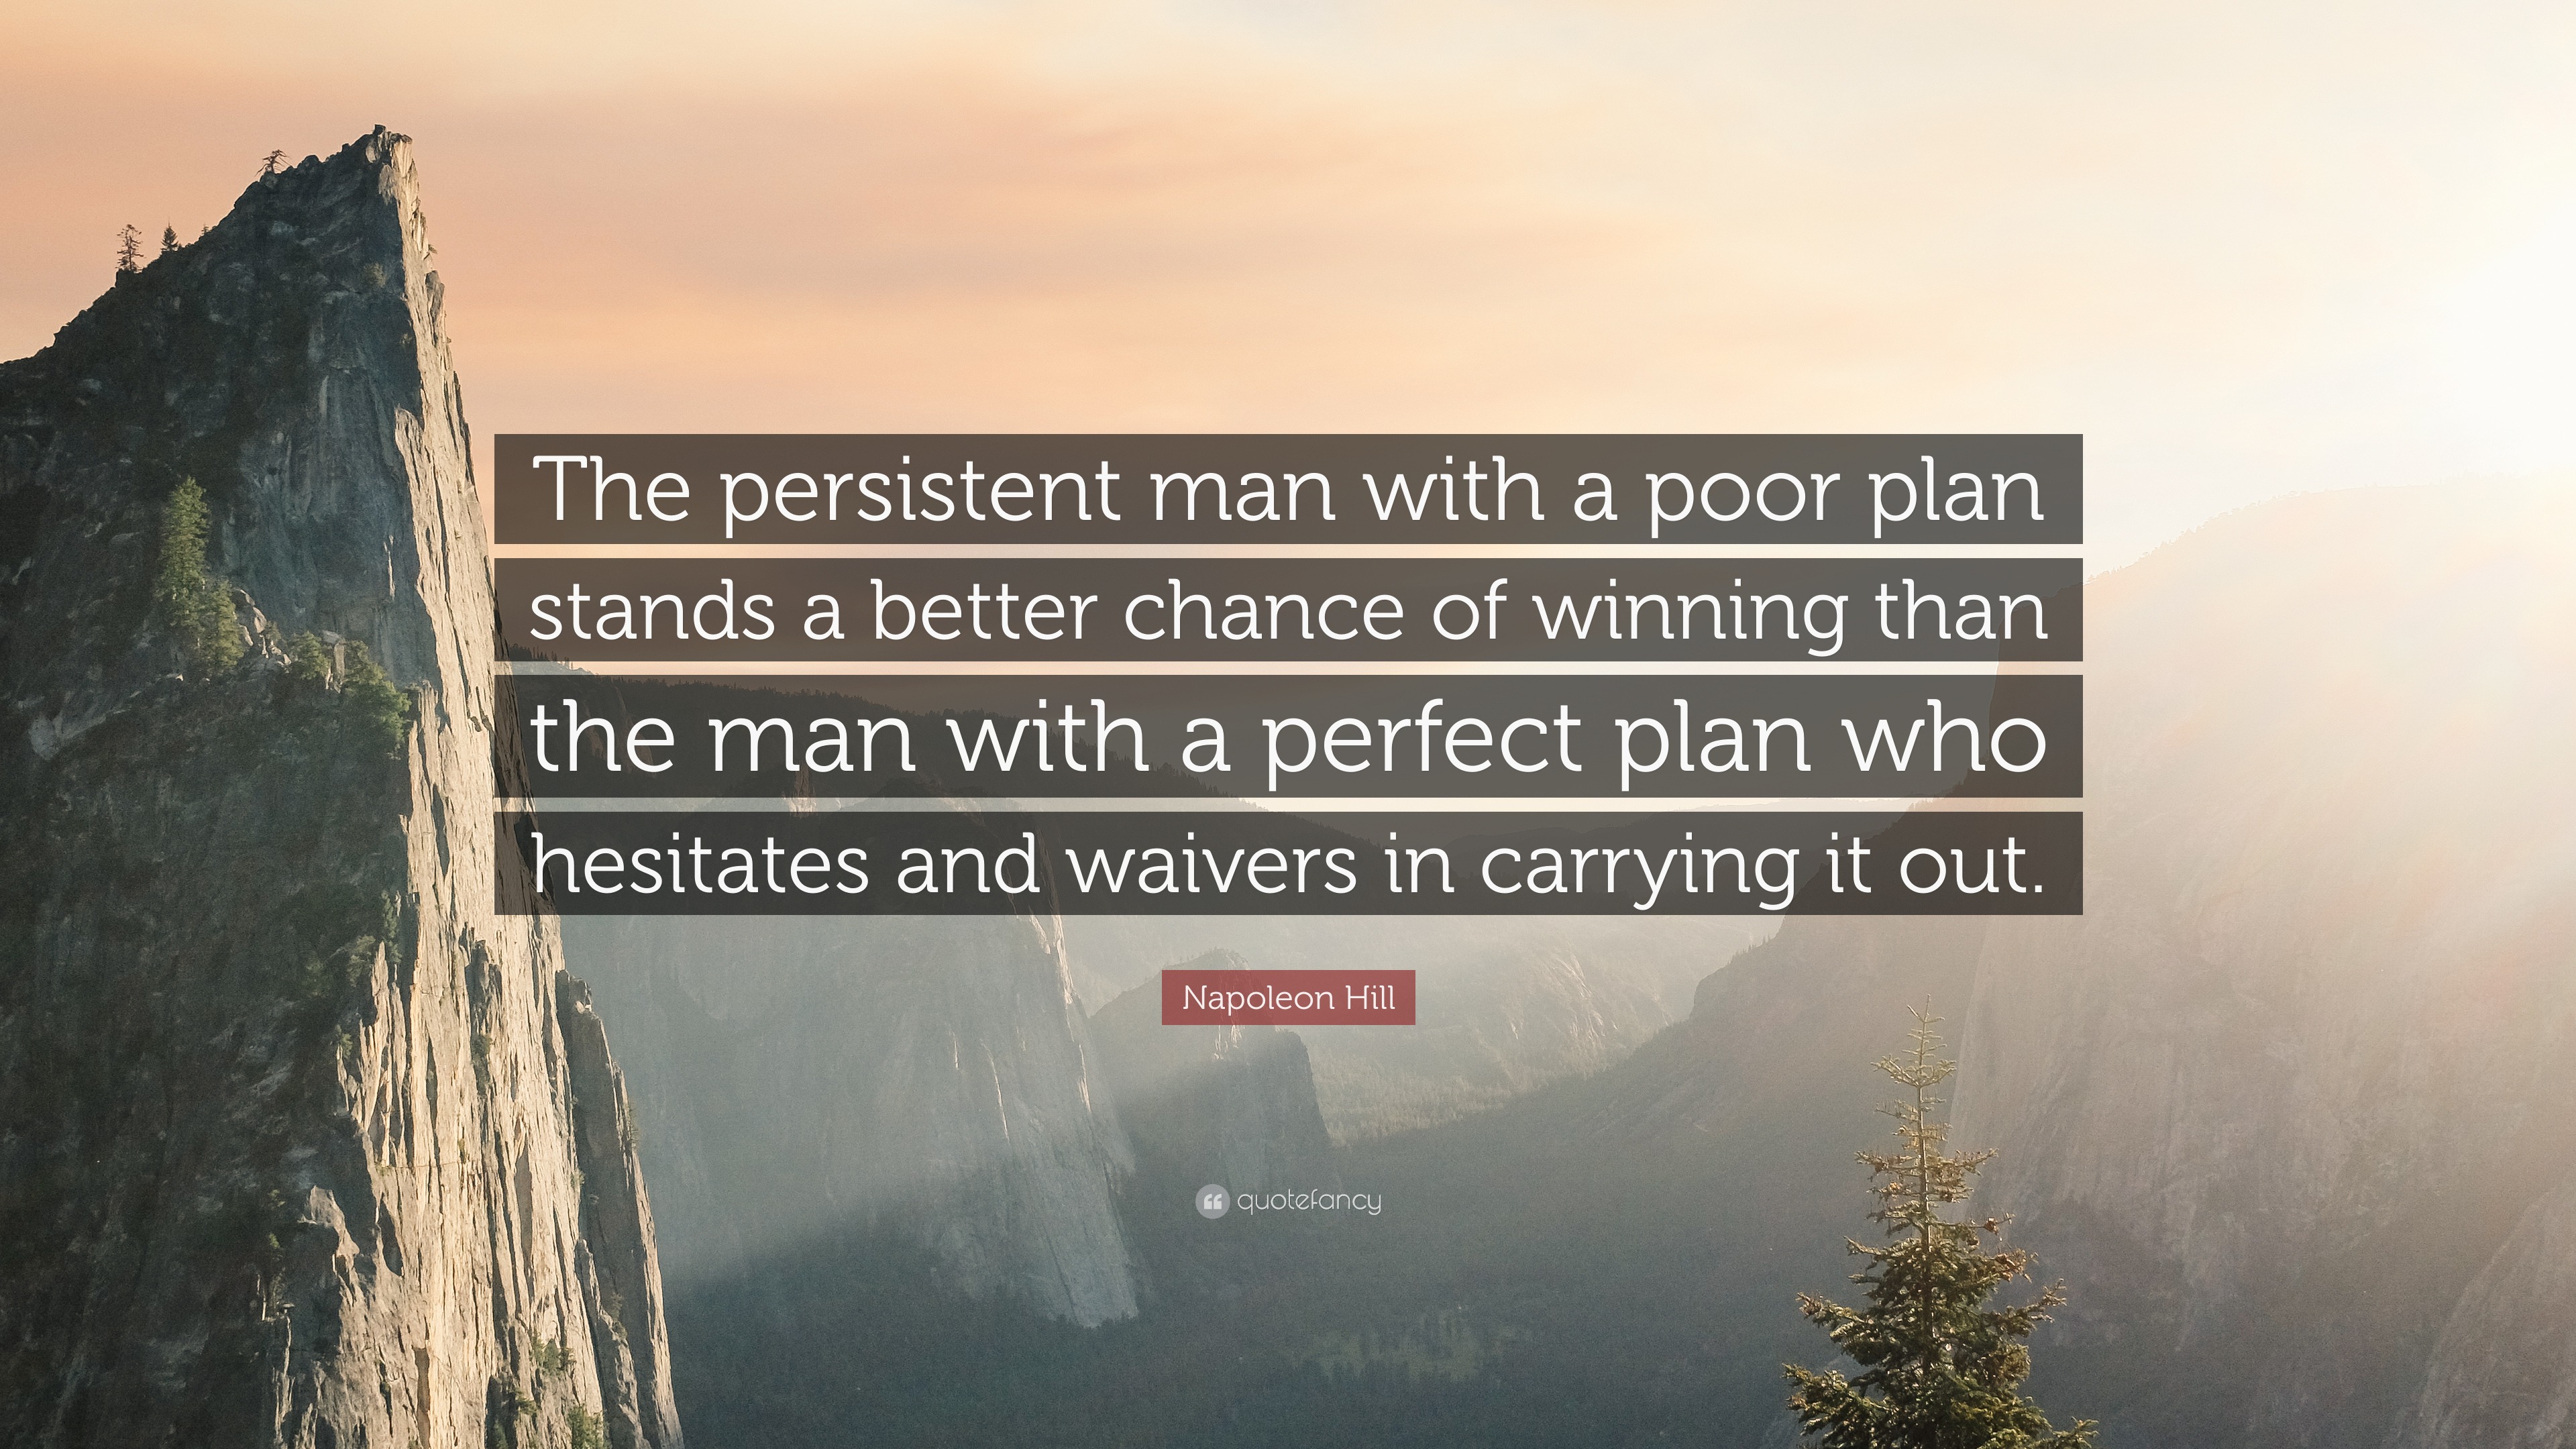 Napoleon Hill Quote: "The persistent man with a poor plan stands a better chance of winning than ...